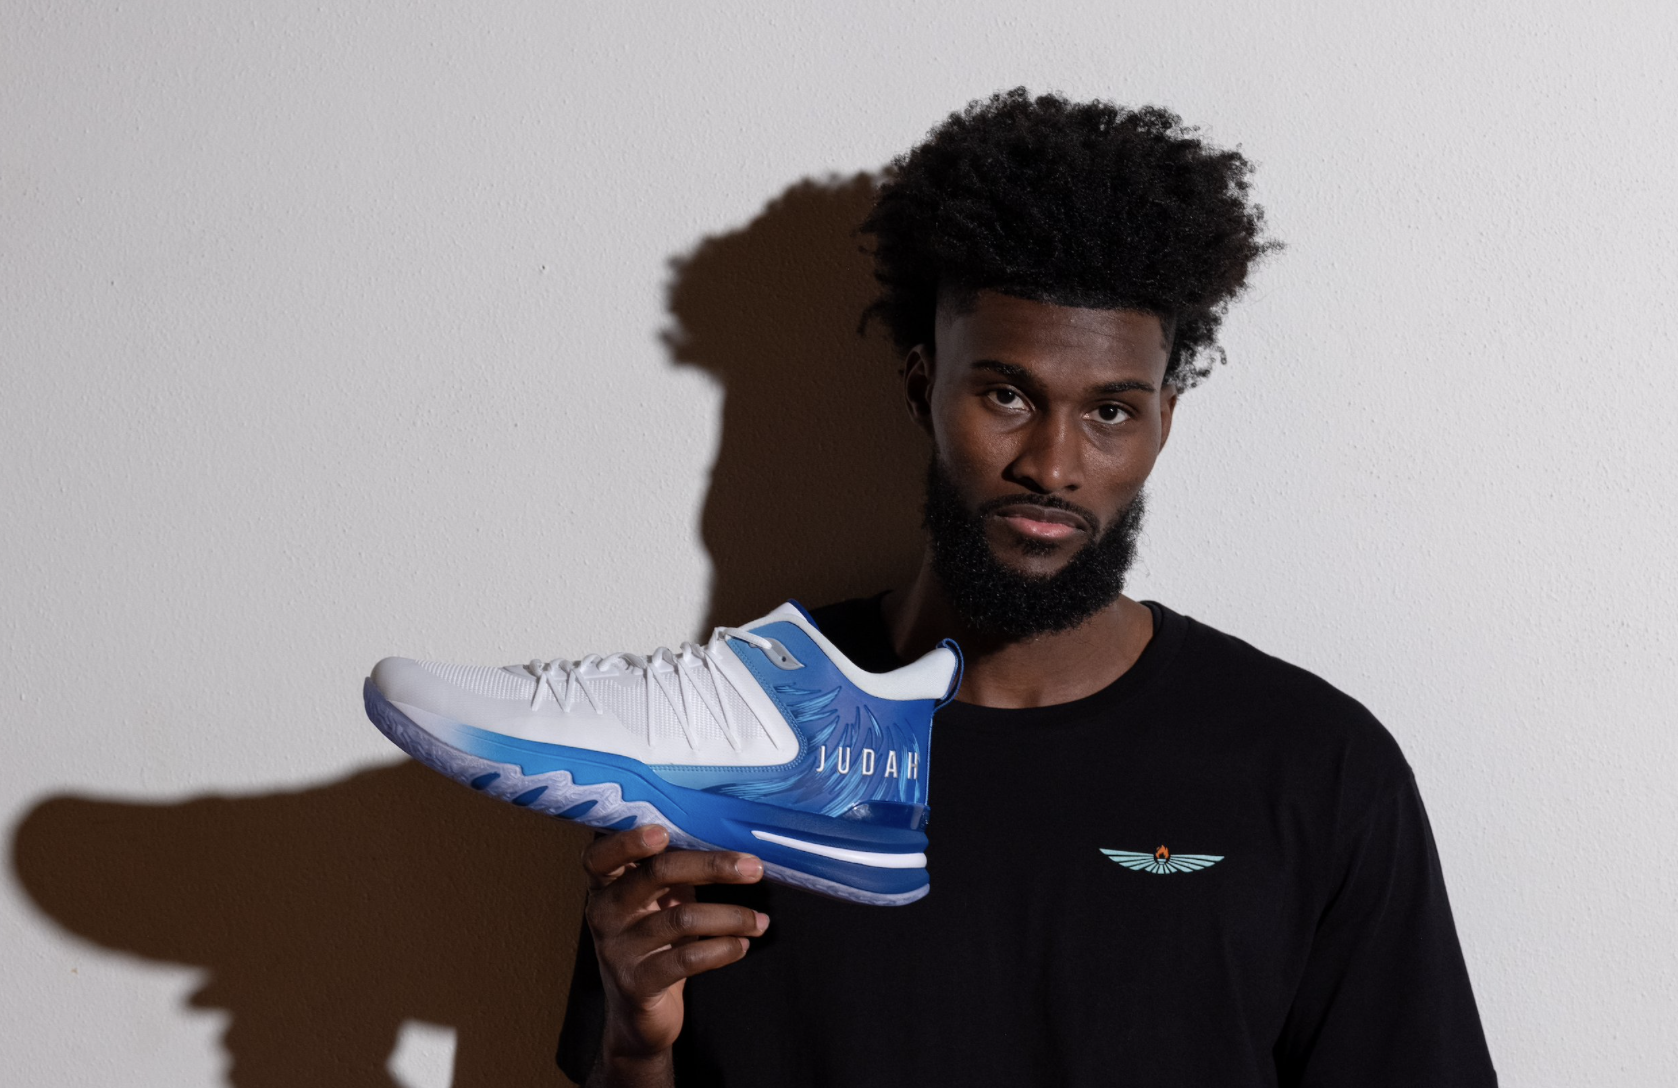 Jonathan Isaac Talks To Daily Wire About Faith, Launch Of Bible Verse-Themed Sneaker Line